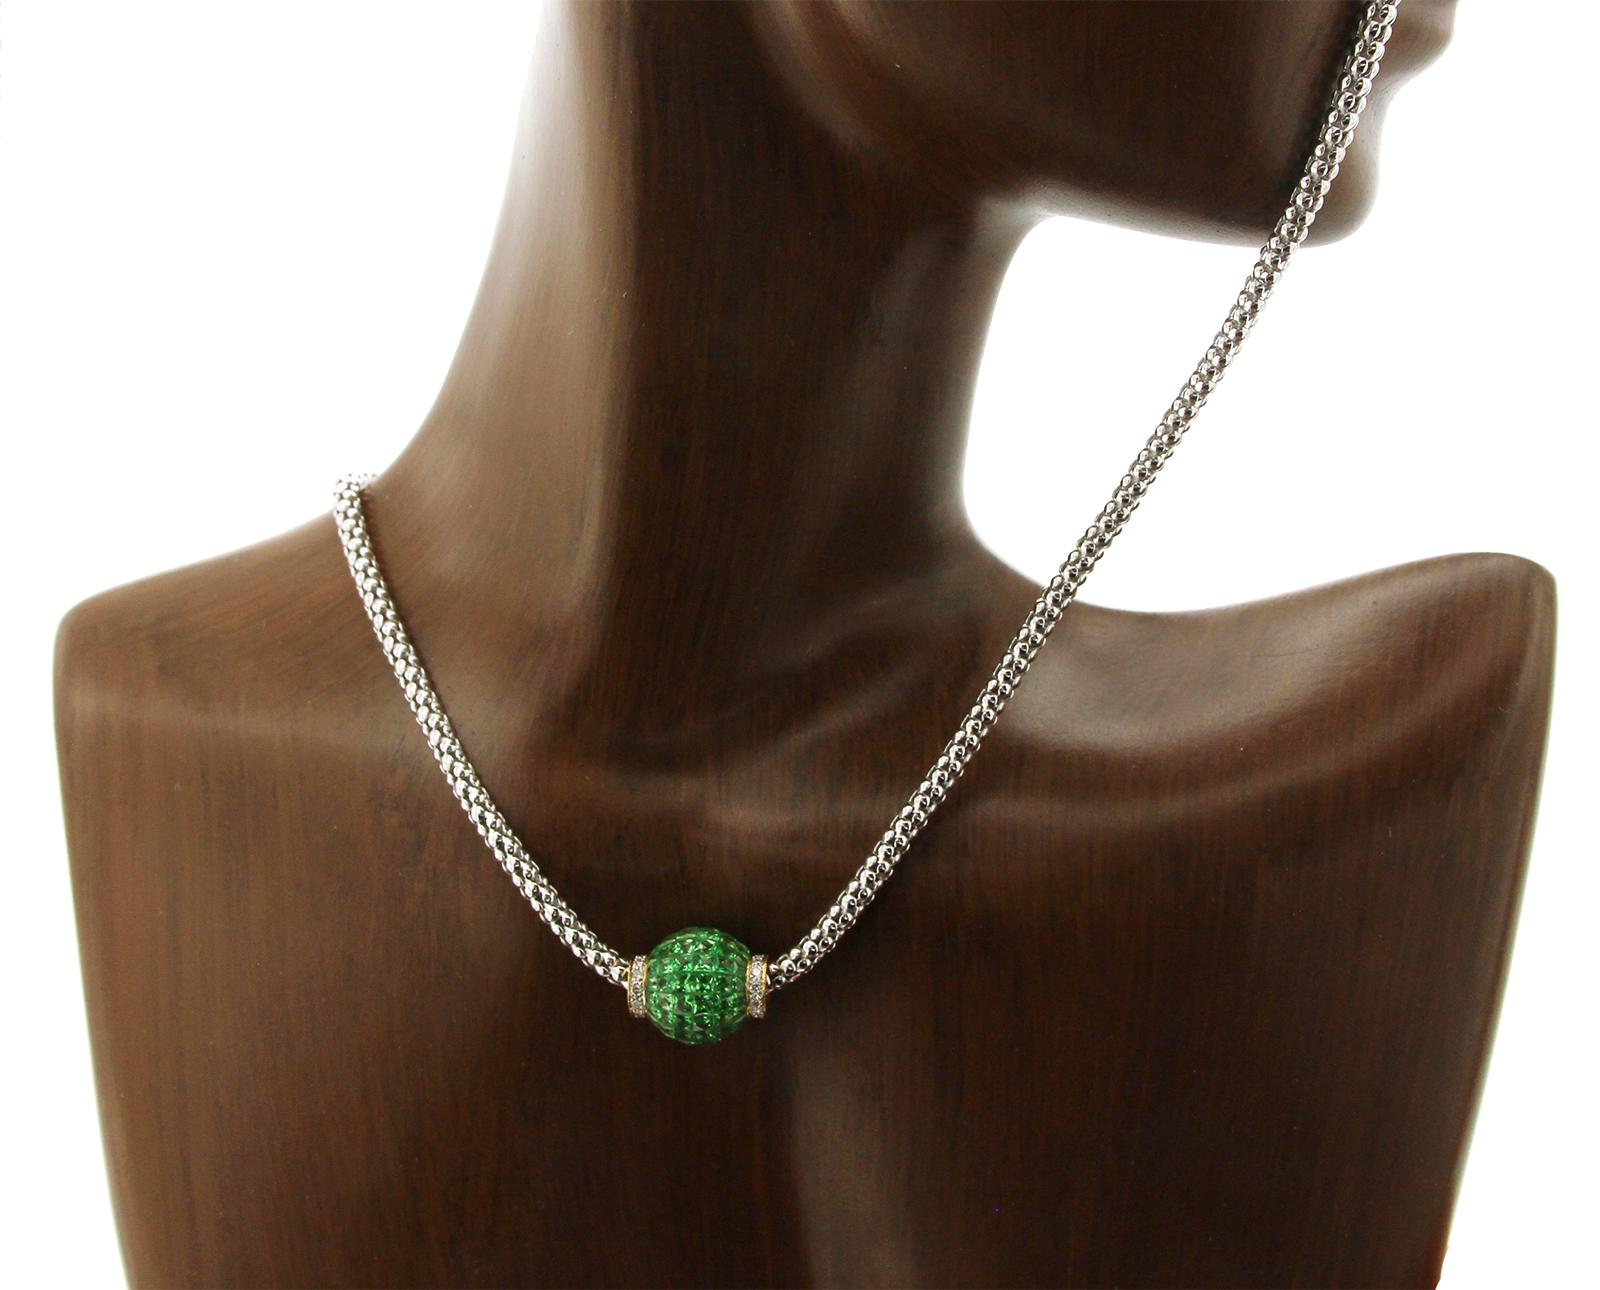 2.86 Natural Tsavorite Bead 0.18 Carat Diamonds 14 Karat Gold Chain Necklace In Excellent Condition For Sale In Los Angeles, CA